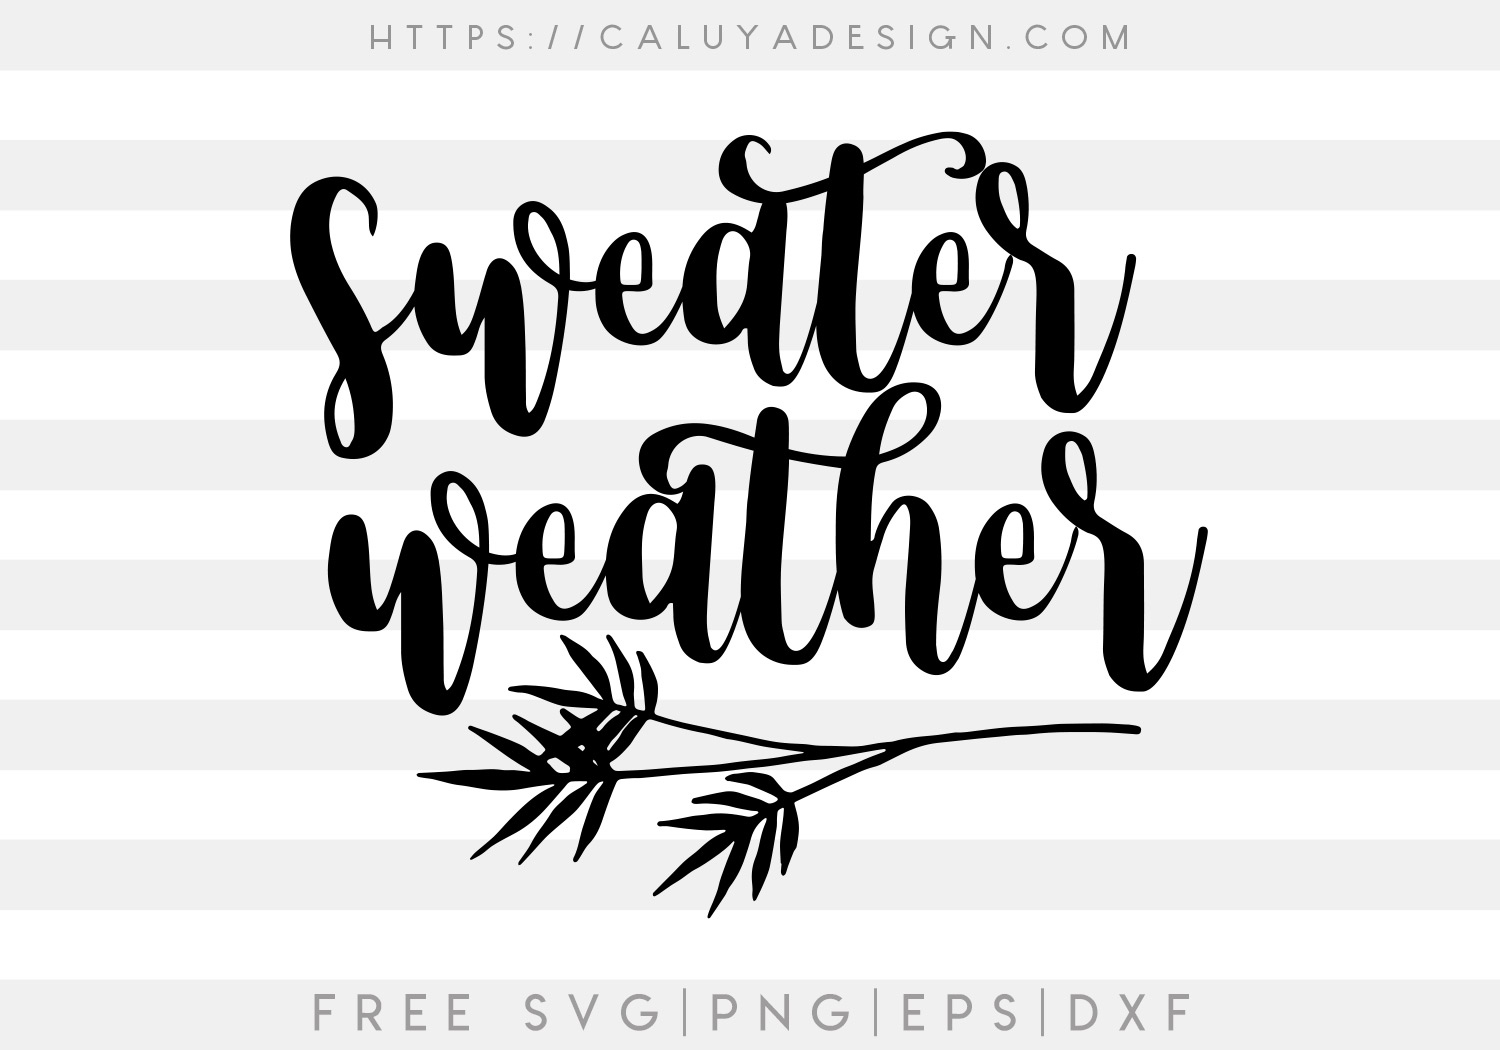 Free Sweater Weather SVG